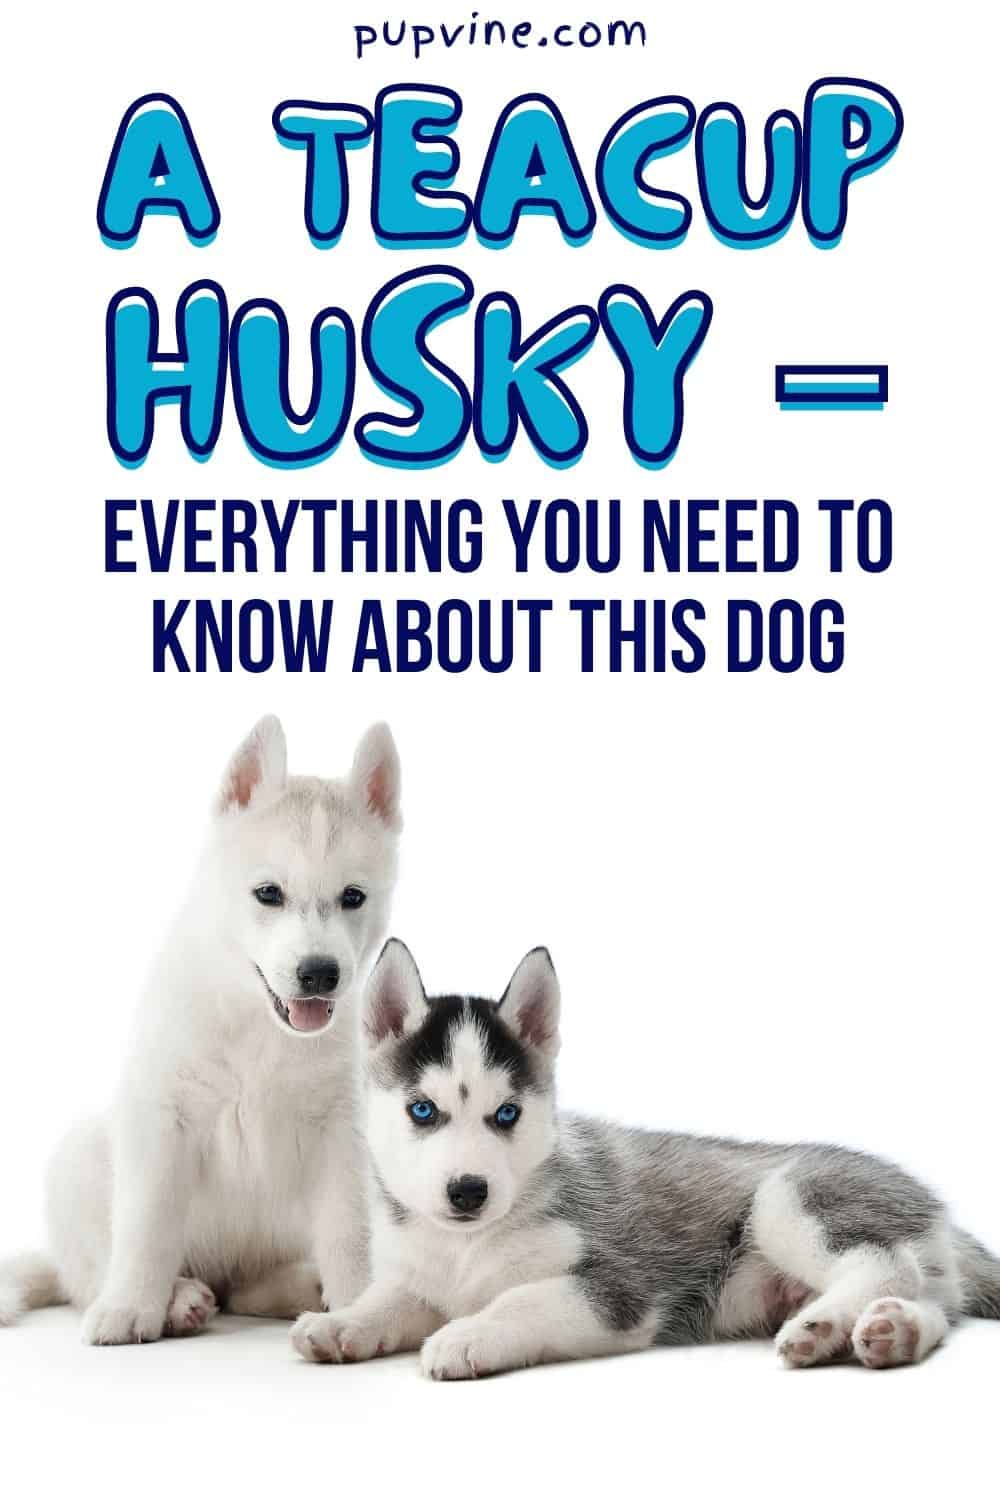 A Teacup Husky – Everything You Need To Know About This Dog